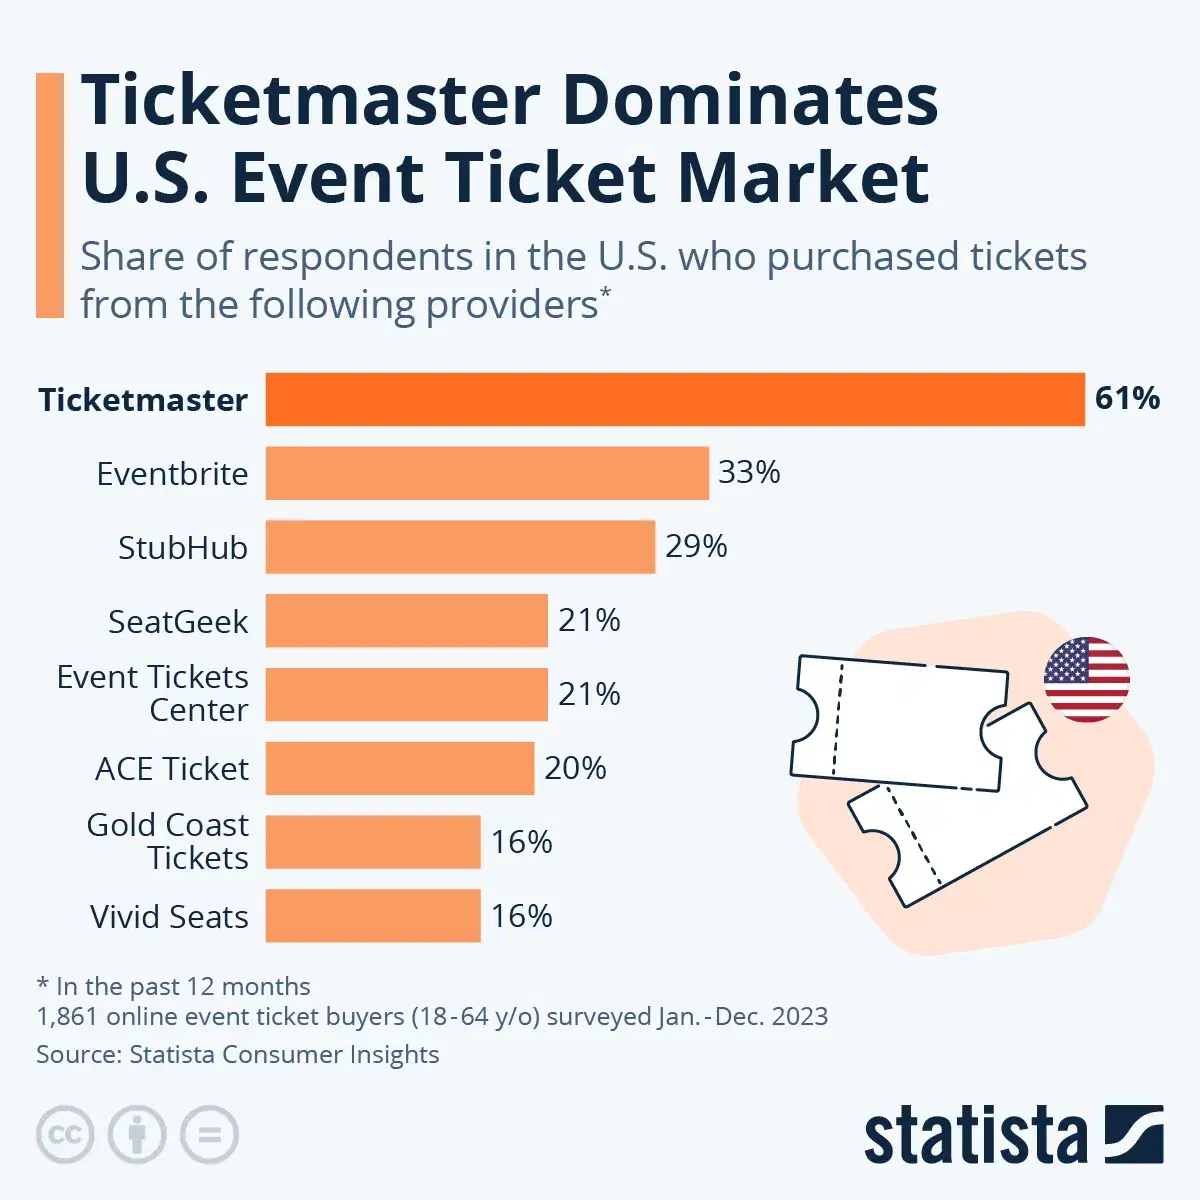 Where Do U.S. Residents Buy Their Tickets?